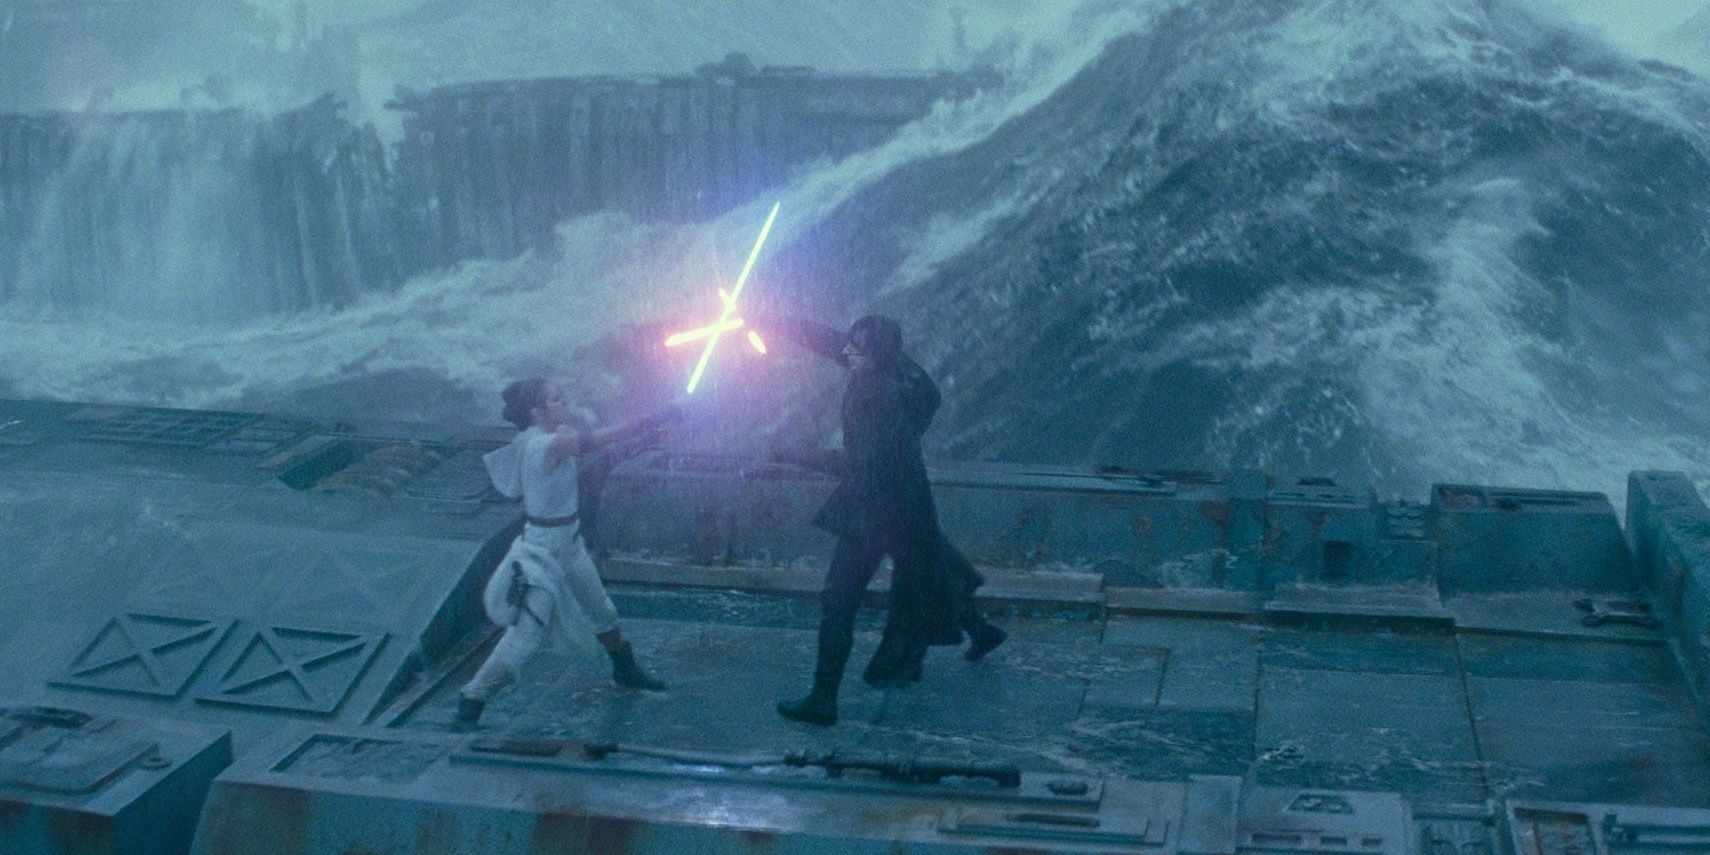 Star Wars The Most Iconic Moment From Every Saga Film Ranked